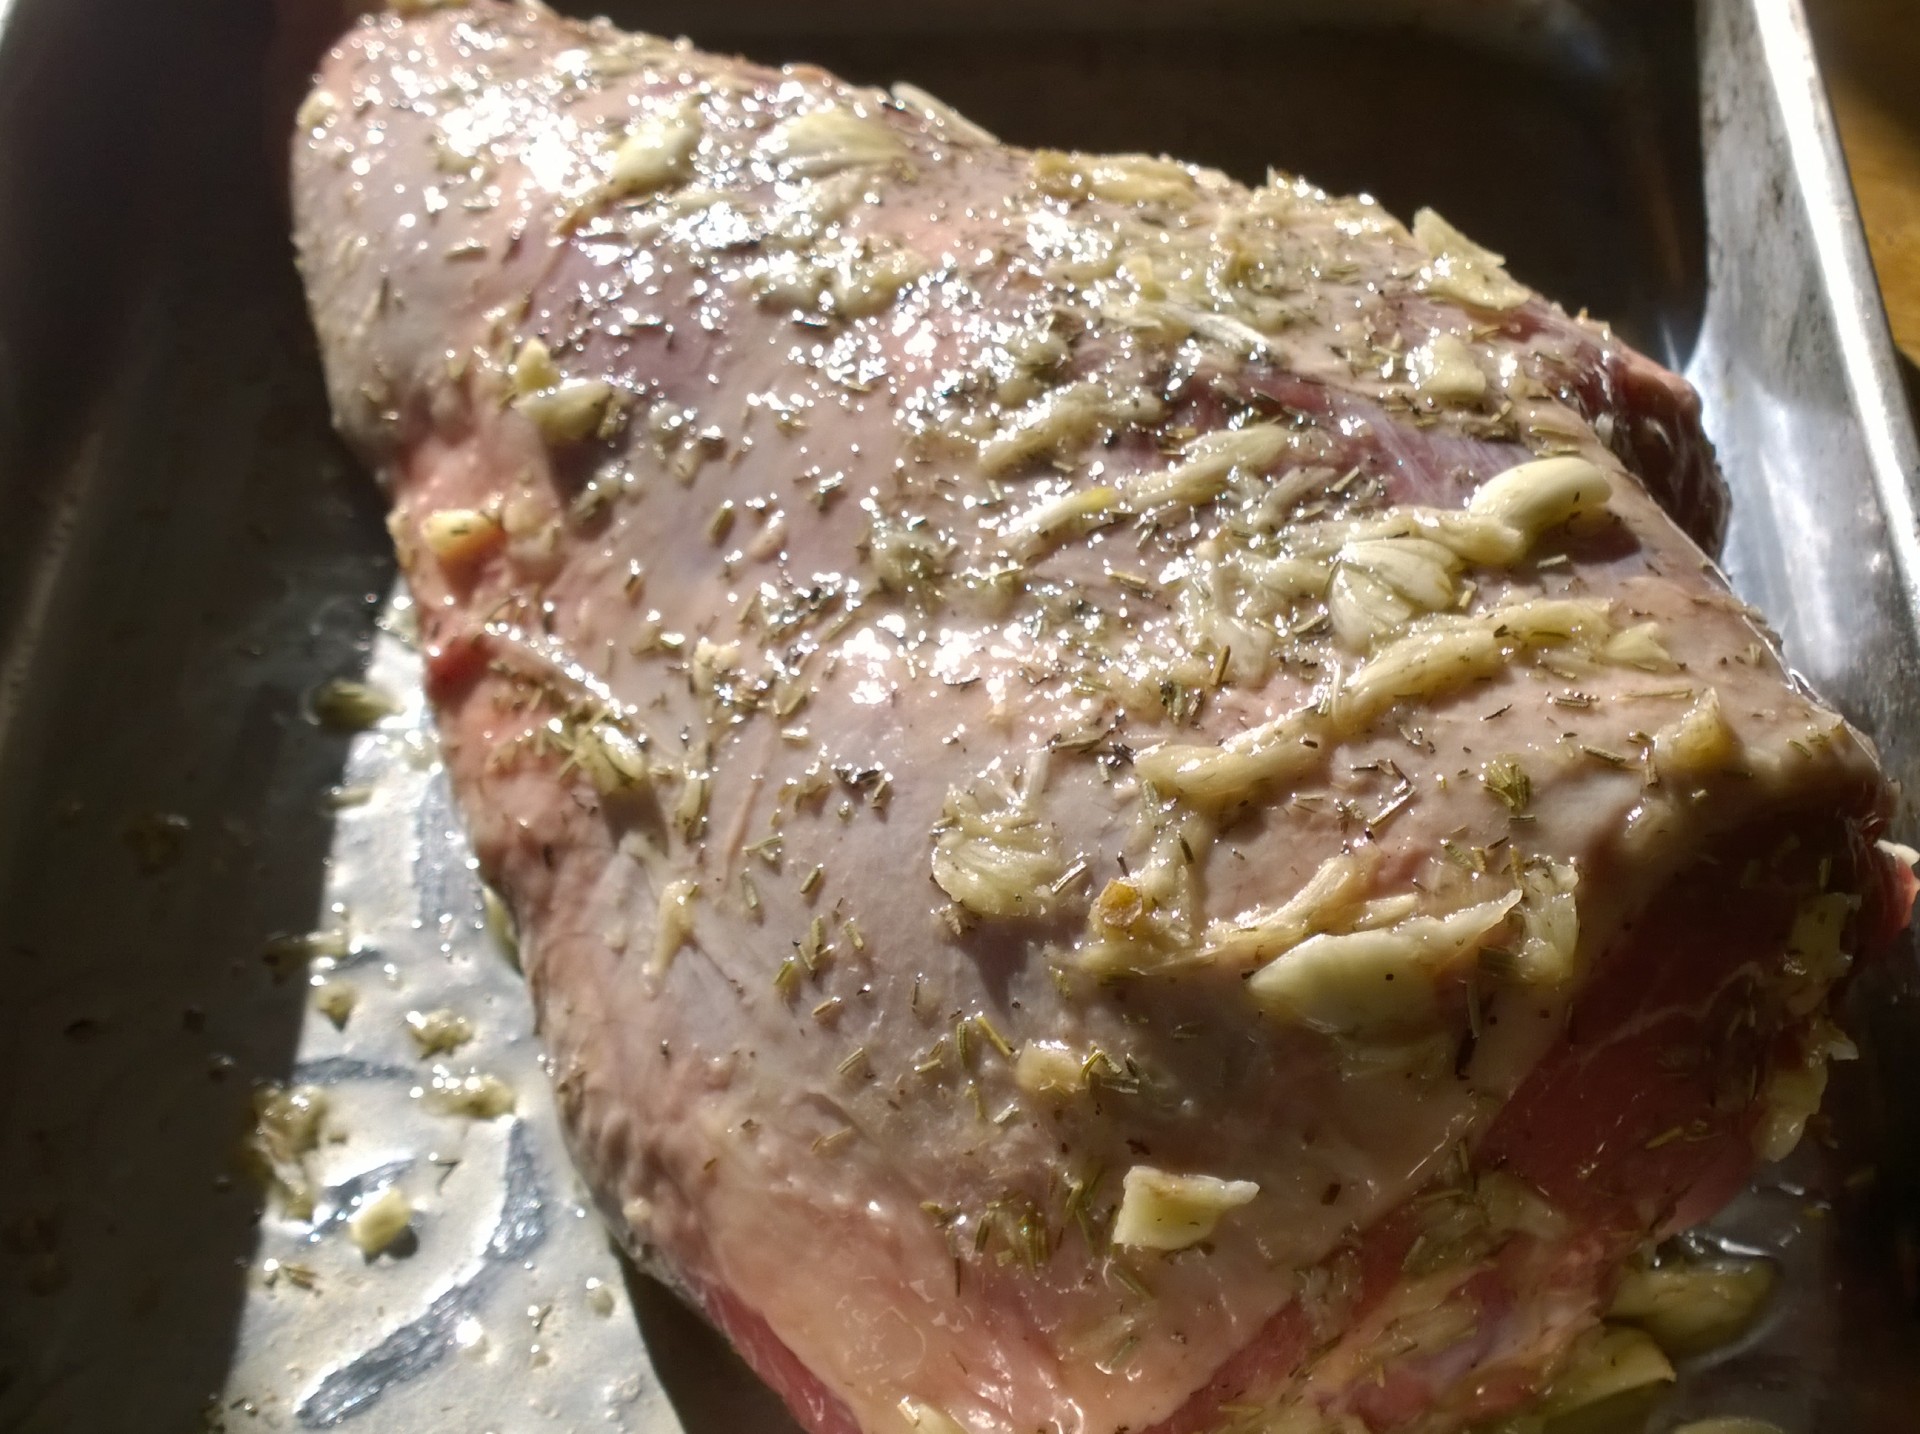 Basted leg of lamb with a garlic and herb rub ready for slow roasting